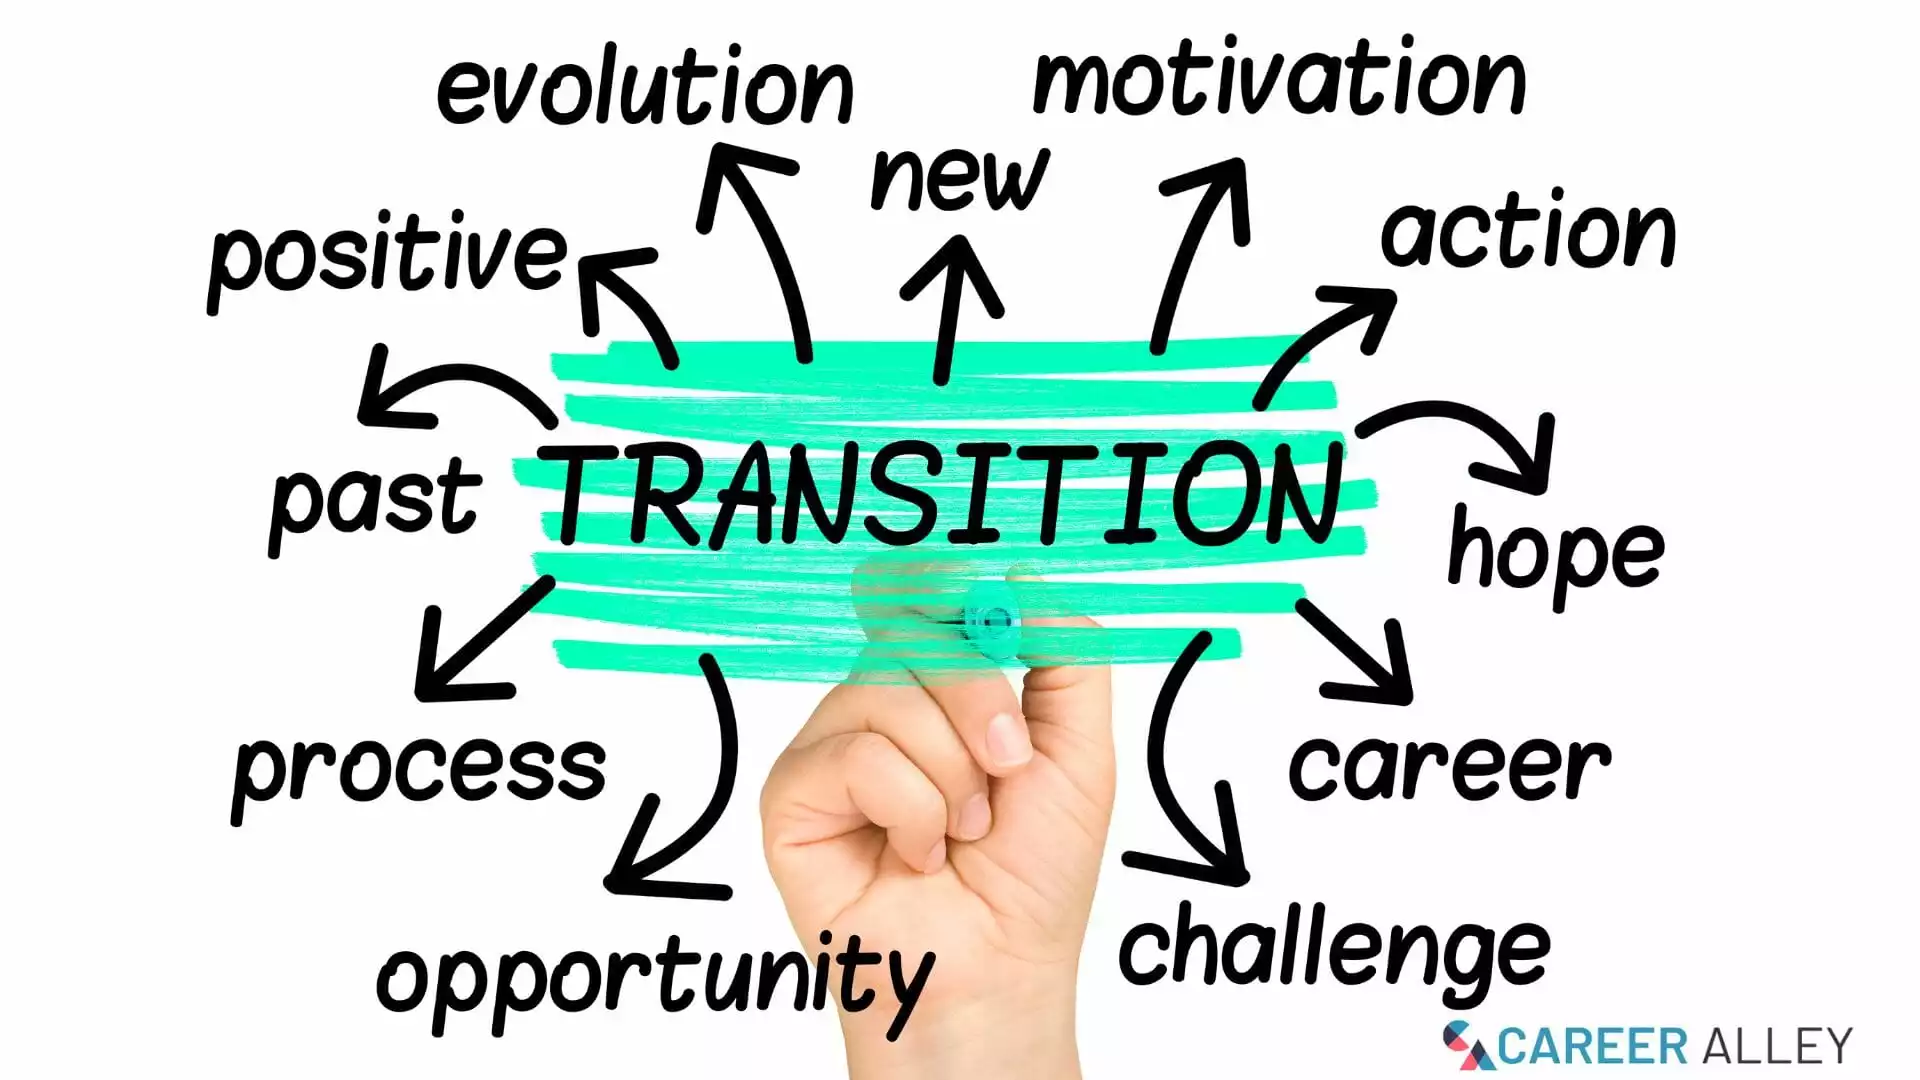 Top Reads to Master the Art of Job Transition